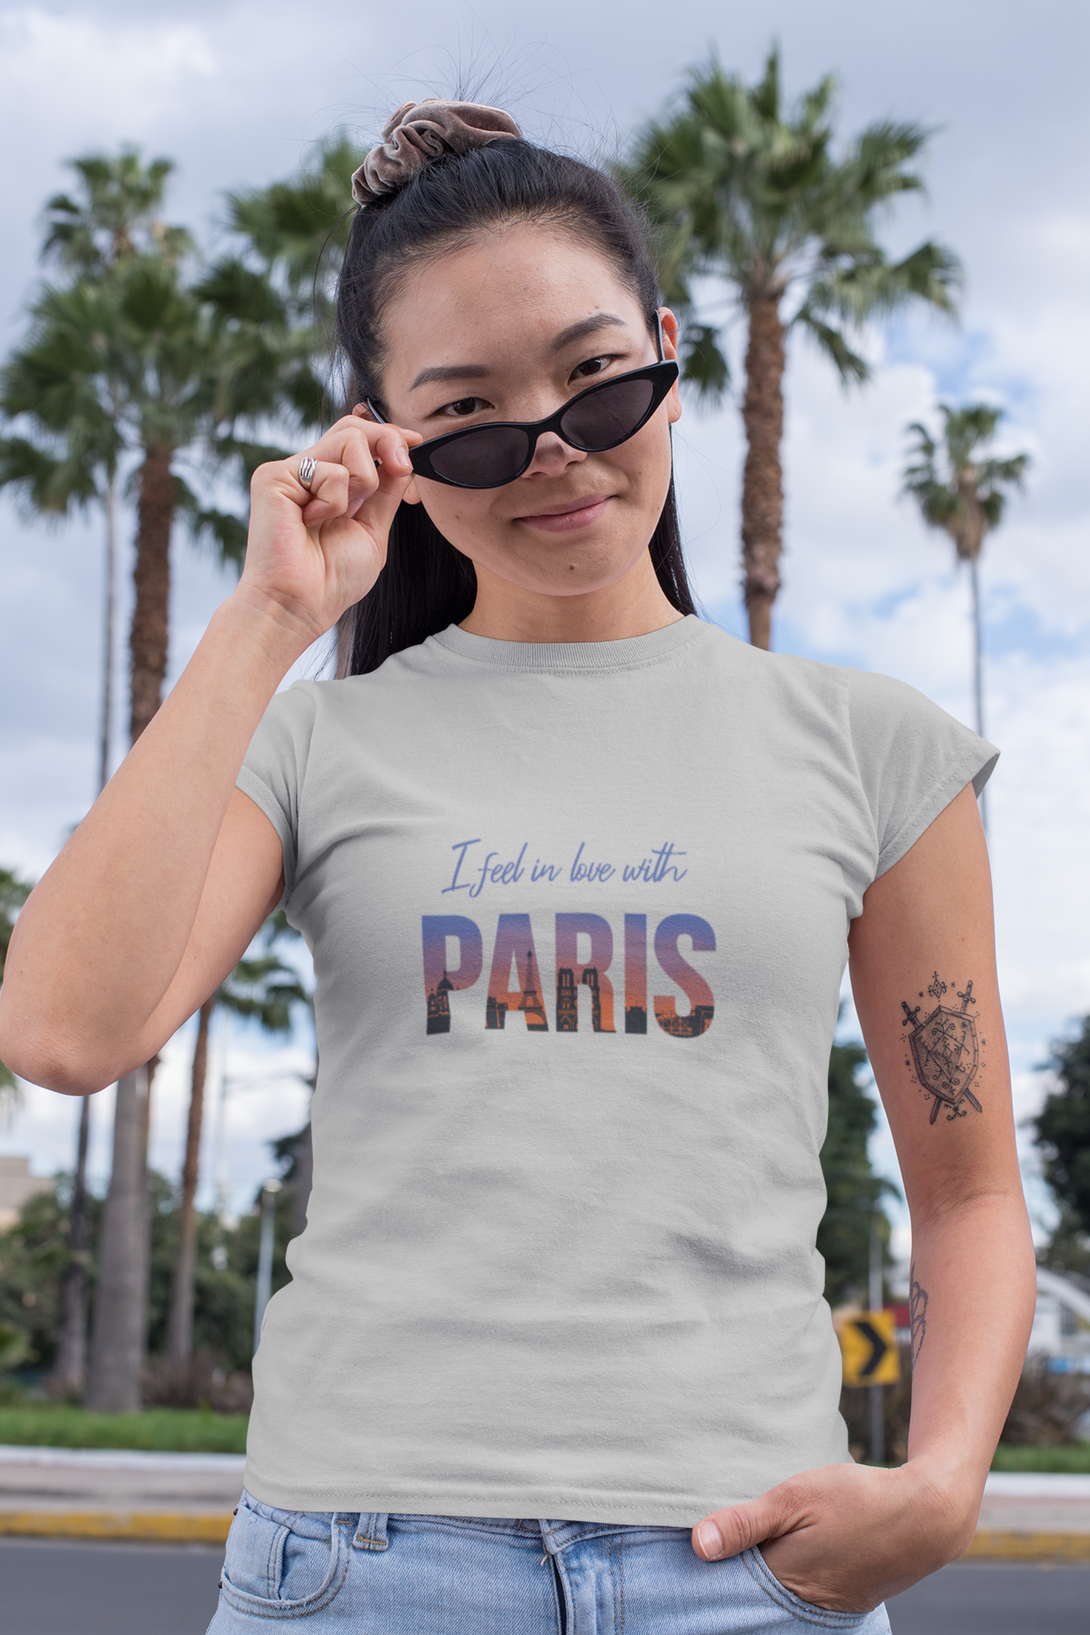 In Love With Paris Printed T-Shirt For Women - WowWaves - 6